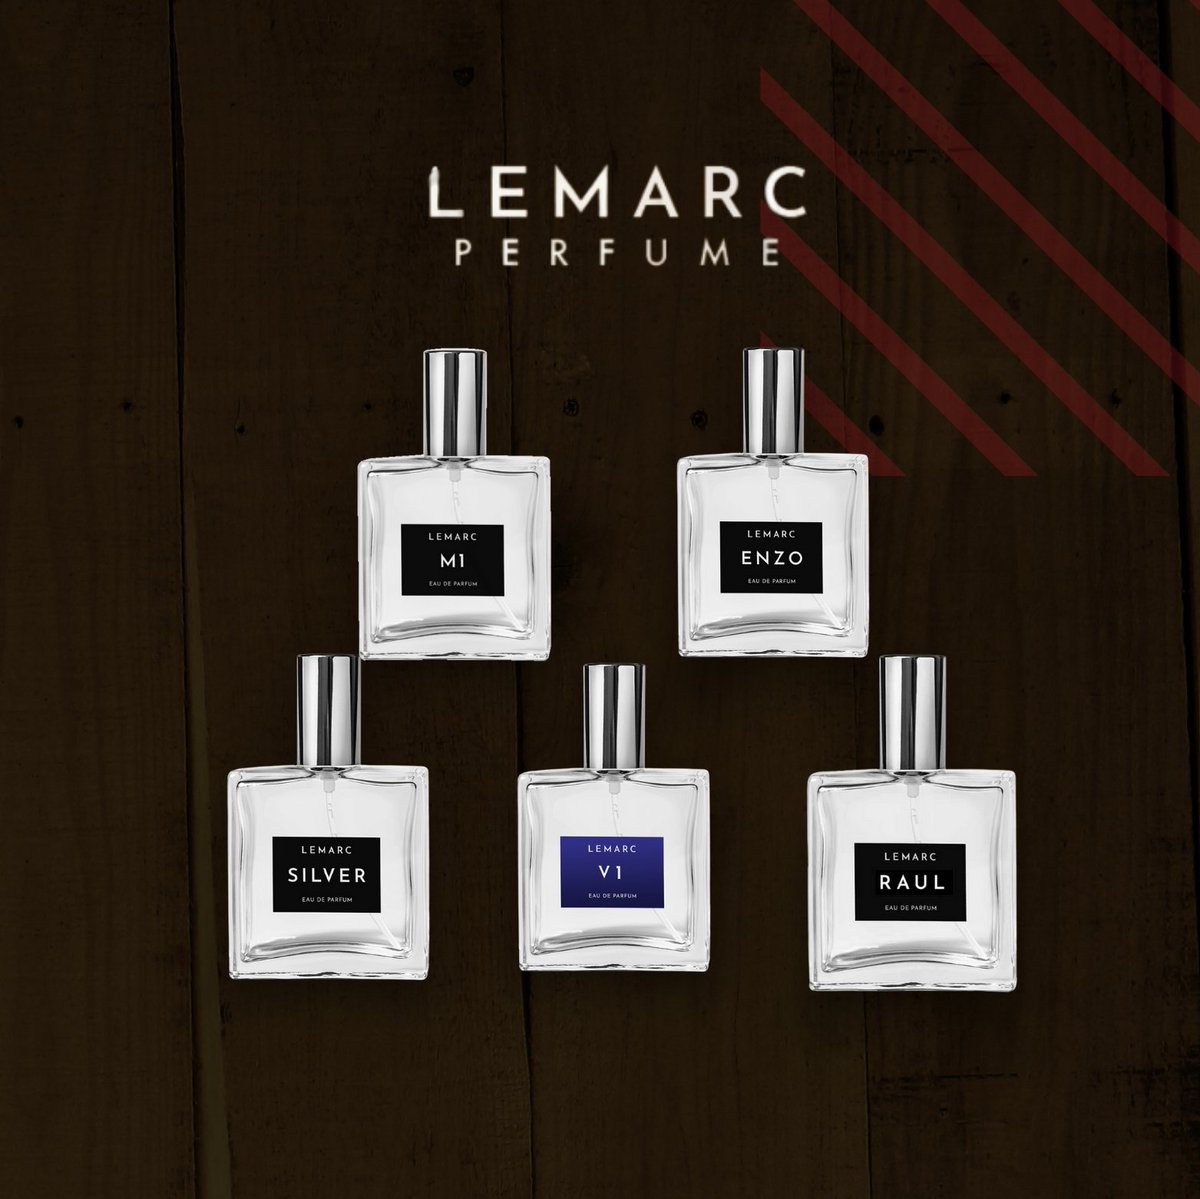 Lemarc Perfume products are designed to express the seductive and attractive personality of determined men. Choose the best ones on lemarcperfume.com
.
.
.
#mensfashion #menswear #influencerstyle #styleofmen #mensstyles #mensfashiontrends #ootdmen